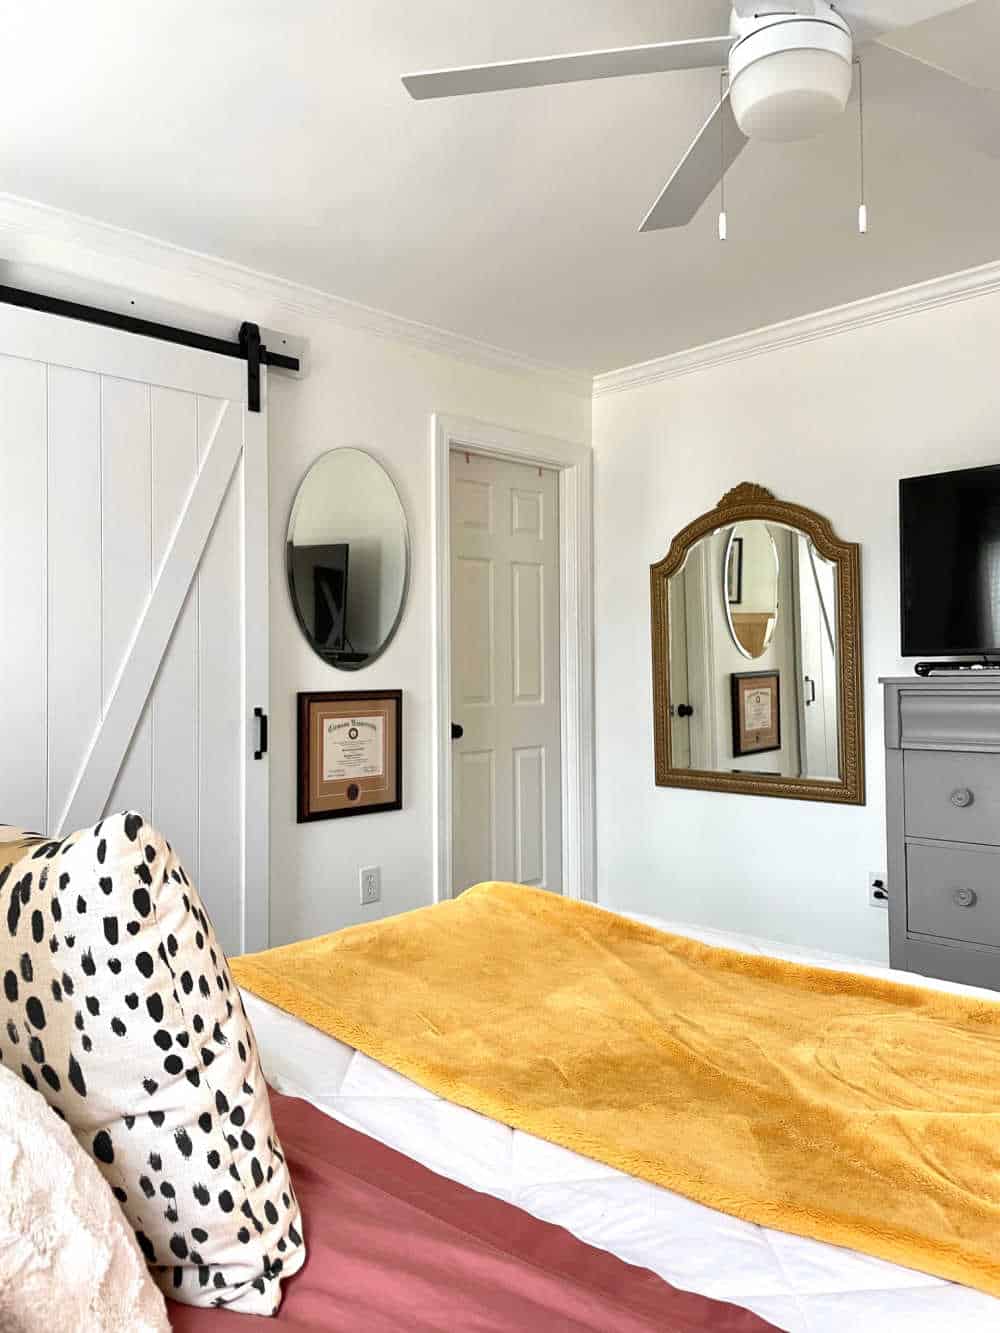 Bedroom with white walls and large wall mirror with rub n buff antique gold